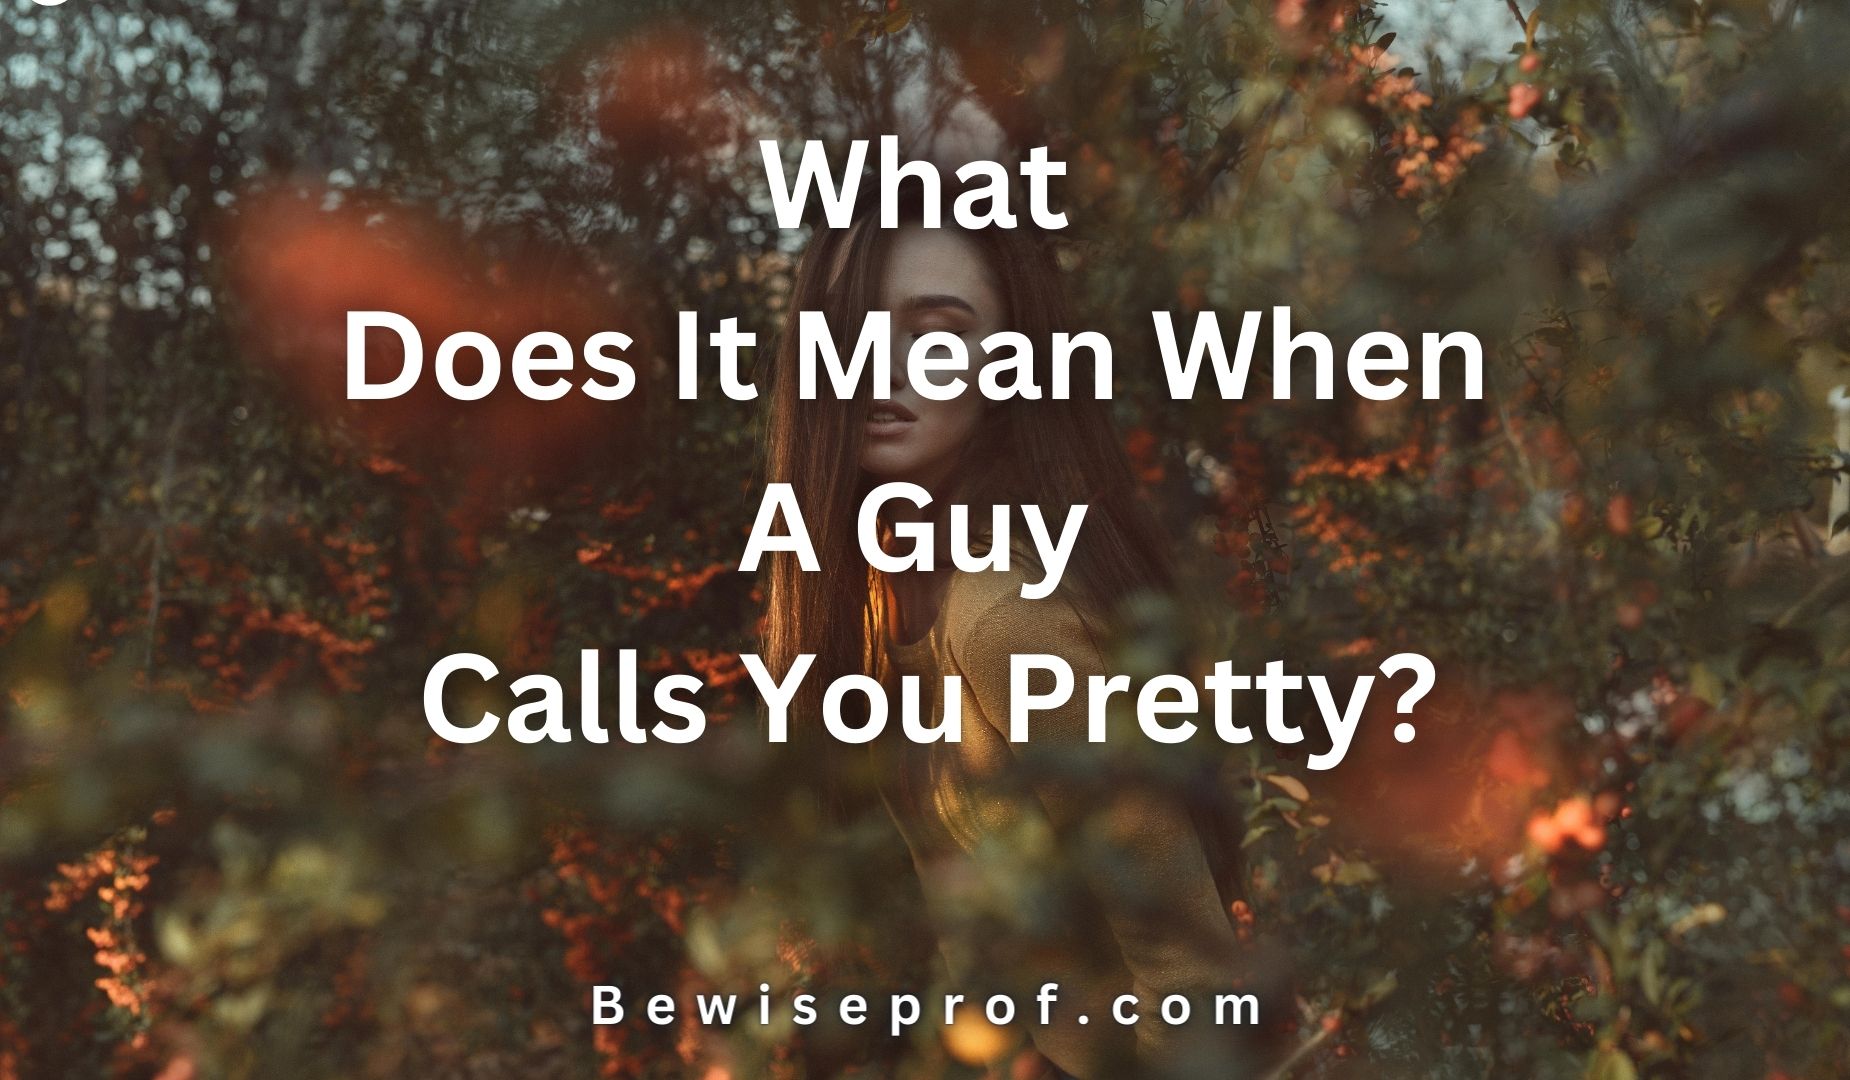 What Does It Mean When A Guy Calls You Pretty?